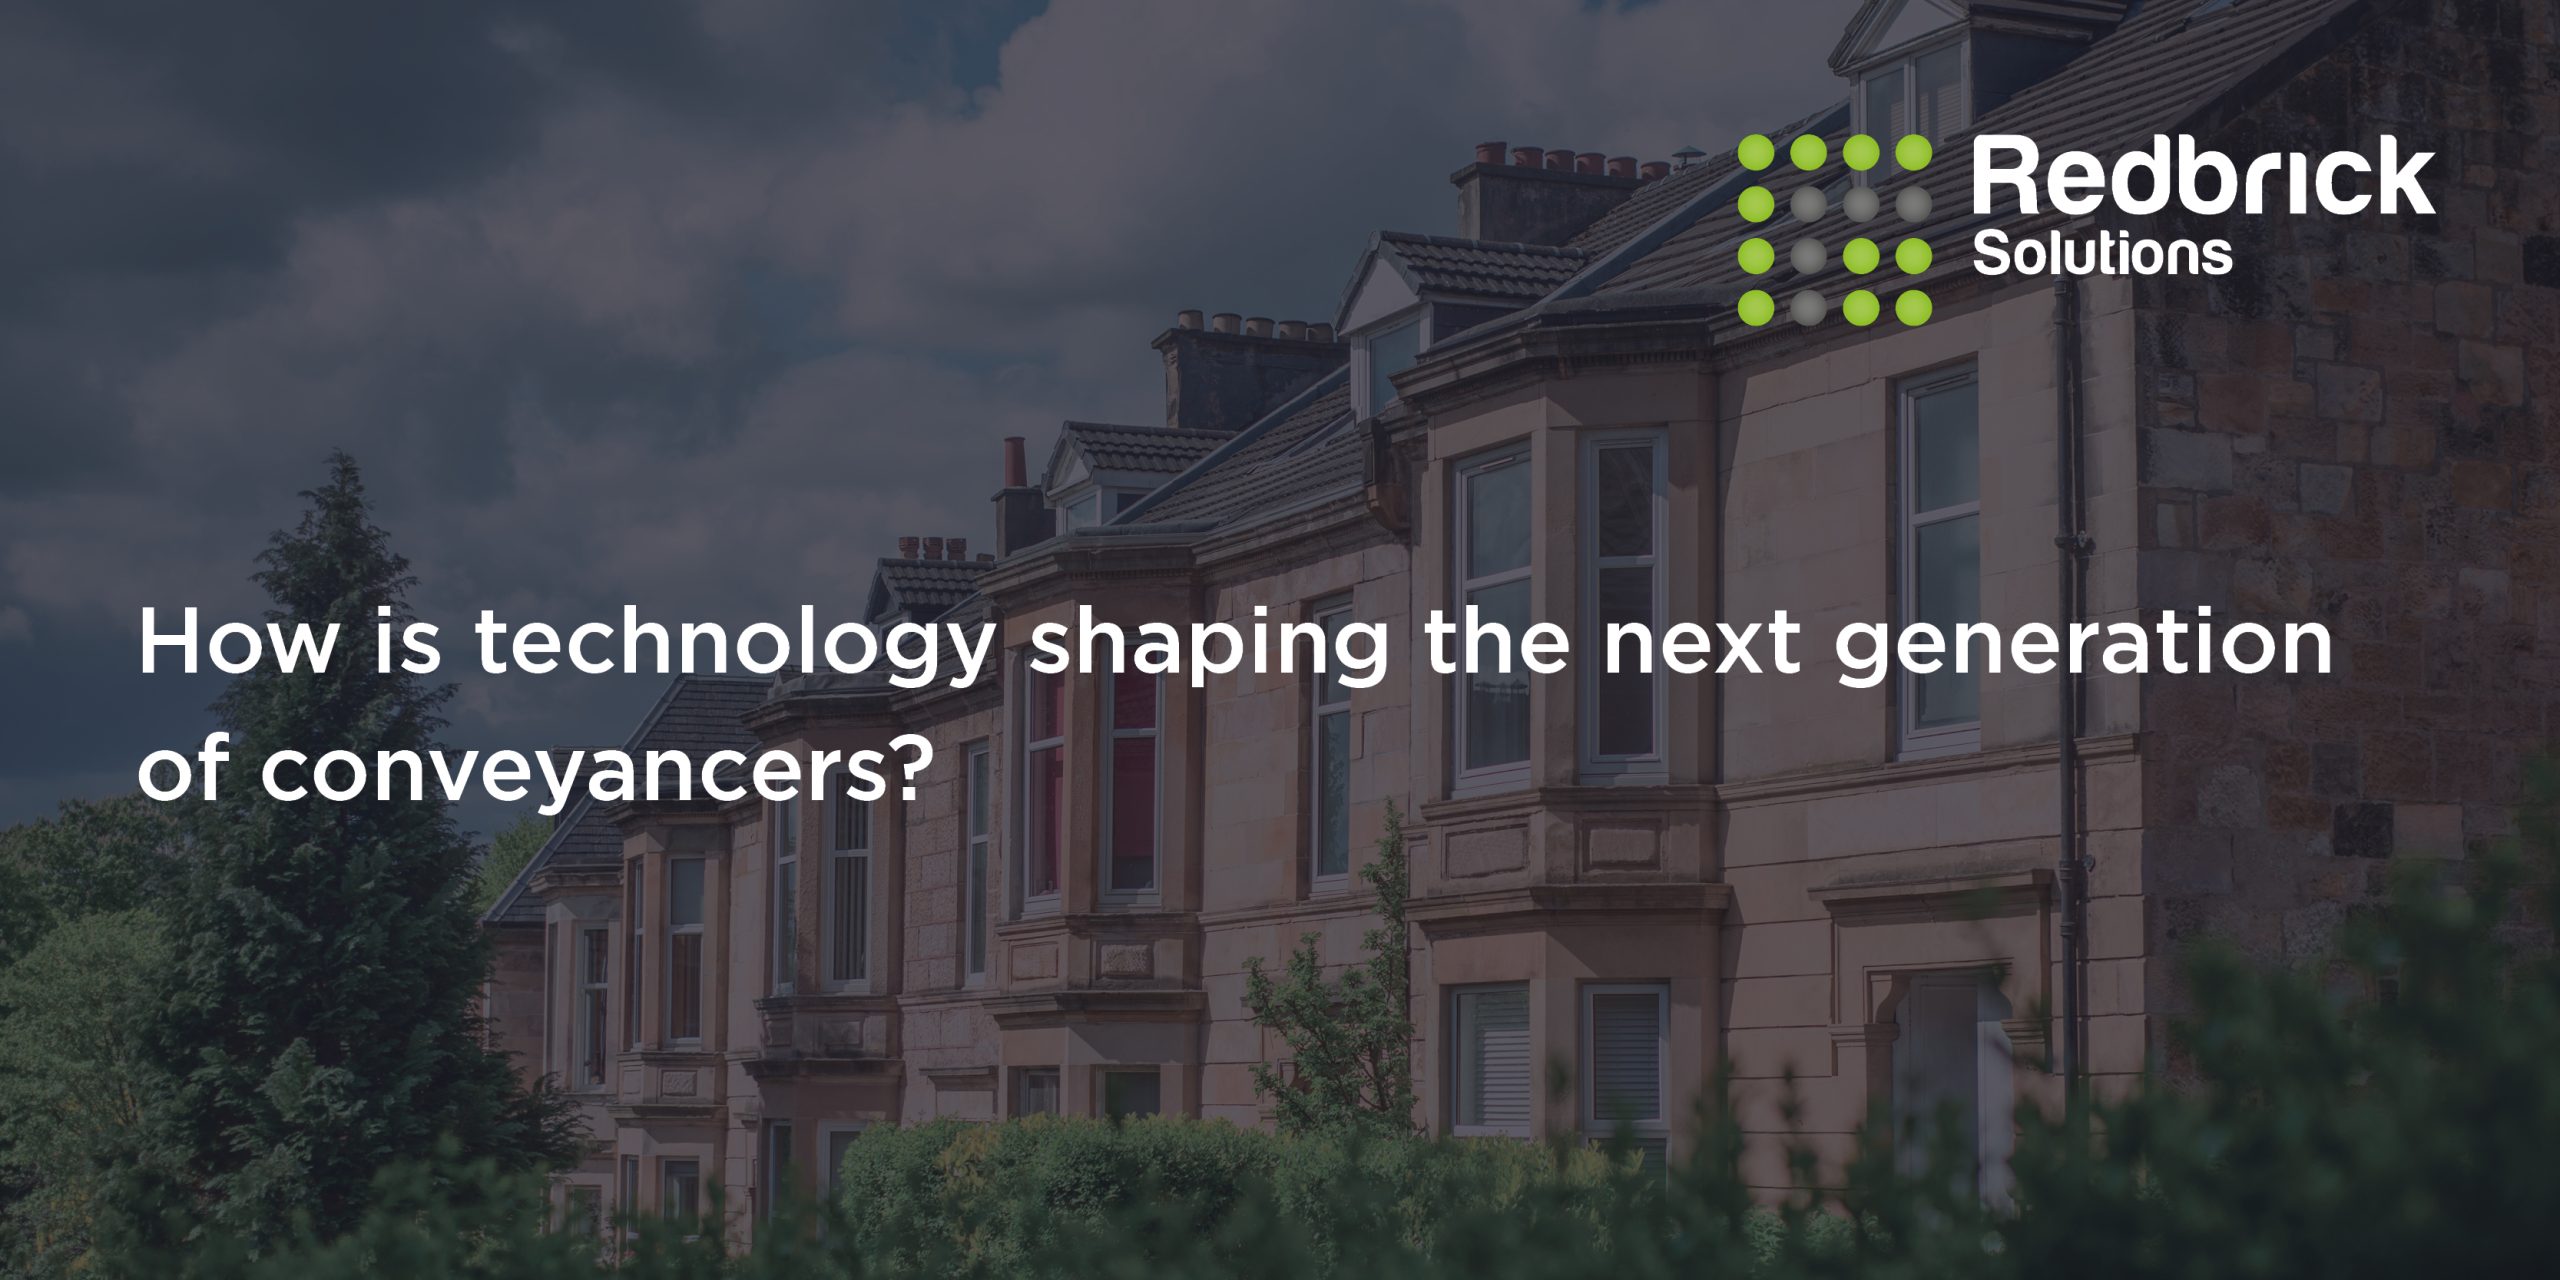 How is technology shaping the next generation of conveyancers?